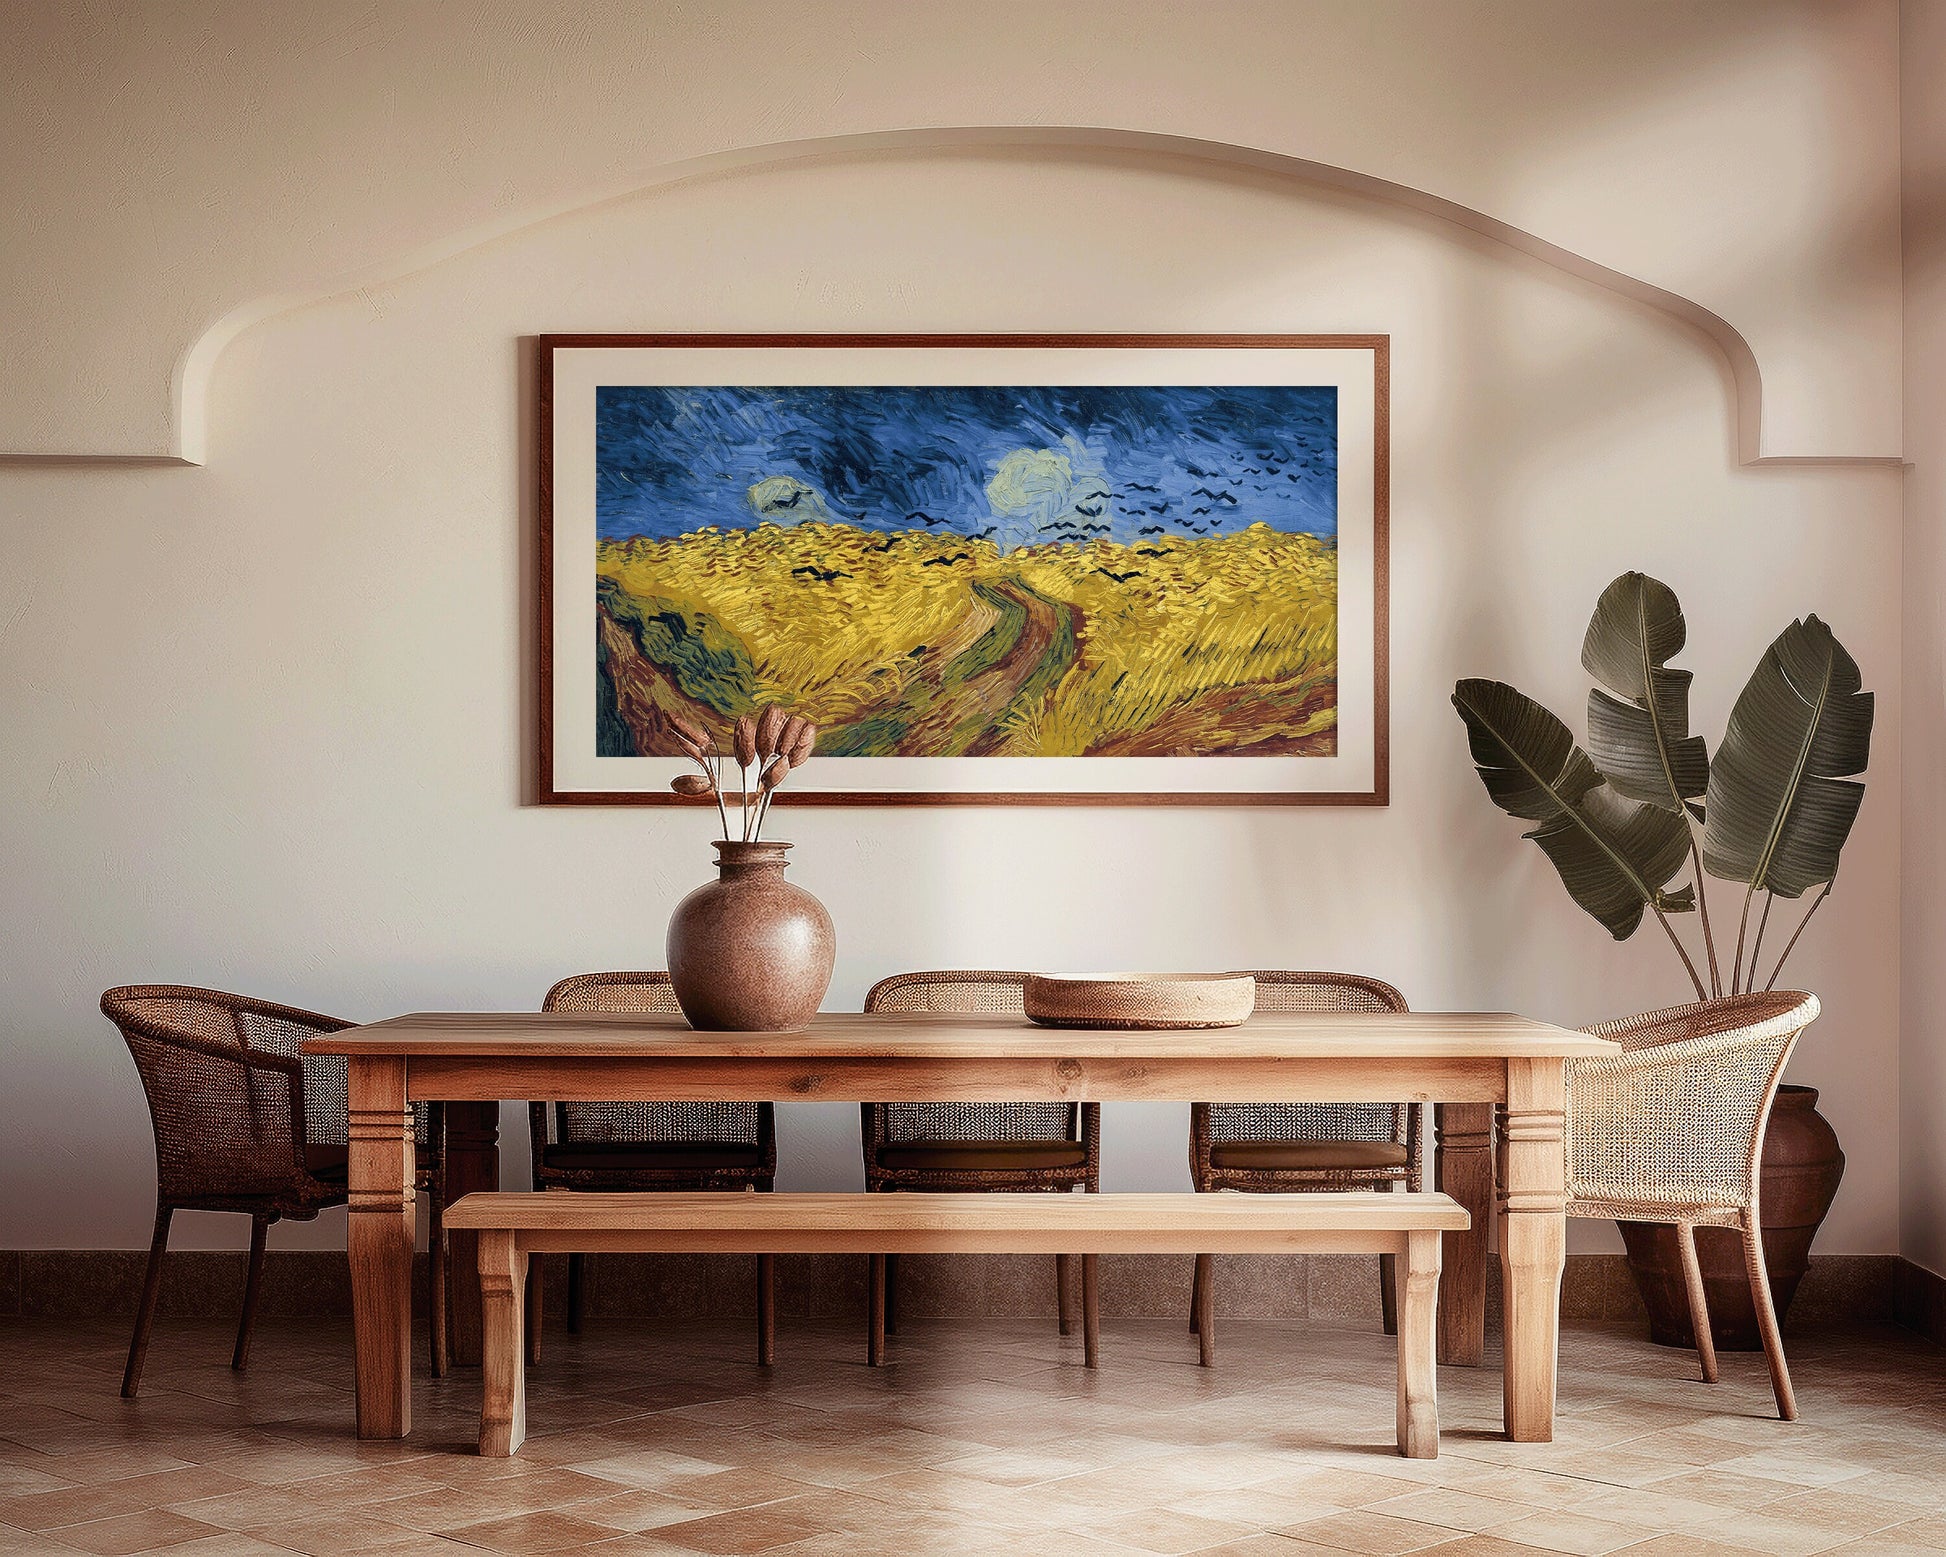 Vincent Van Gogh – Wheatfield with Crows | Vintage Impressionist Wide Panoramic Art (available framed or unframed)